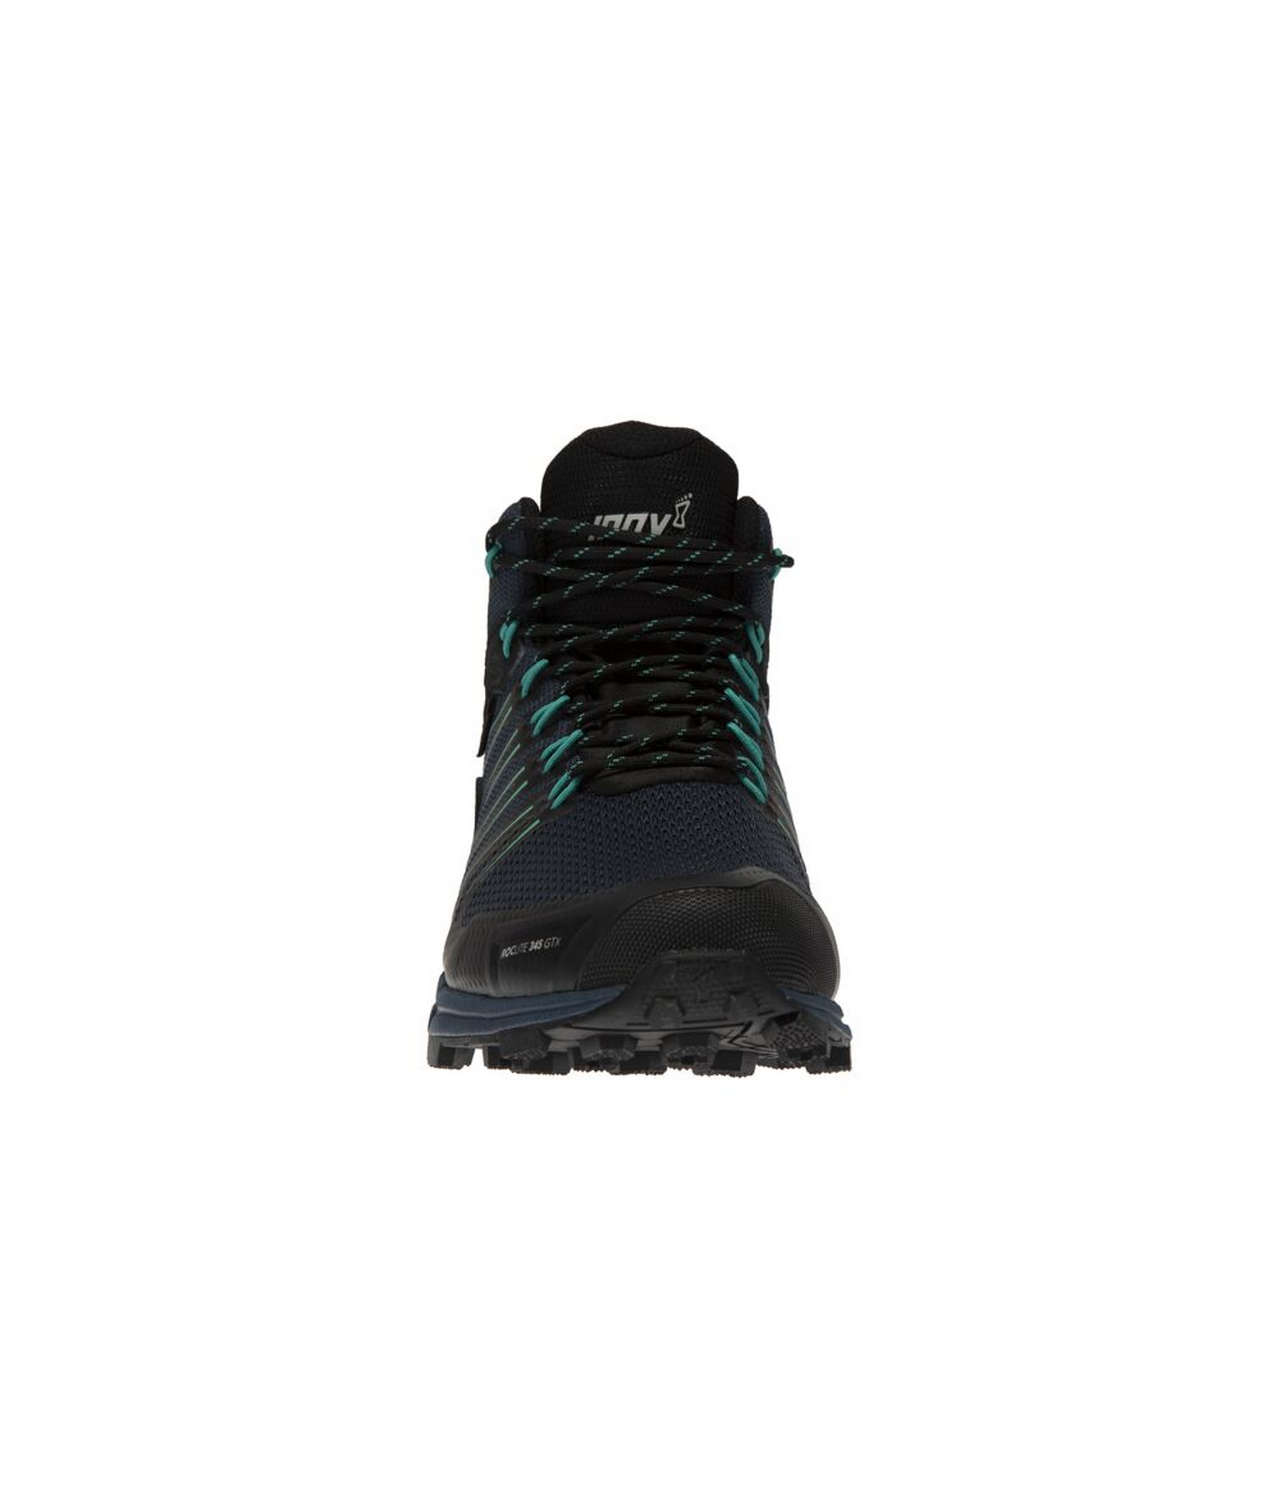 inov 8 roclite g 345 gtx w navy teal hike mid boot fast and light 6